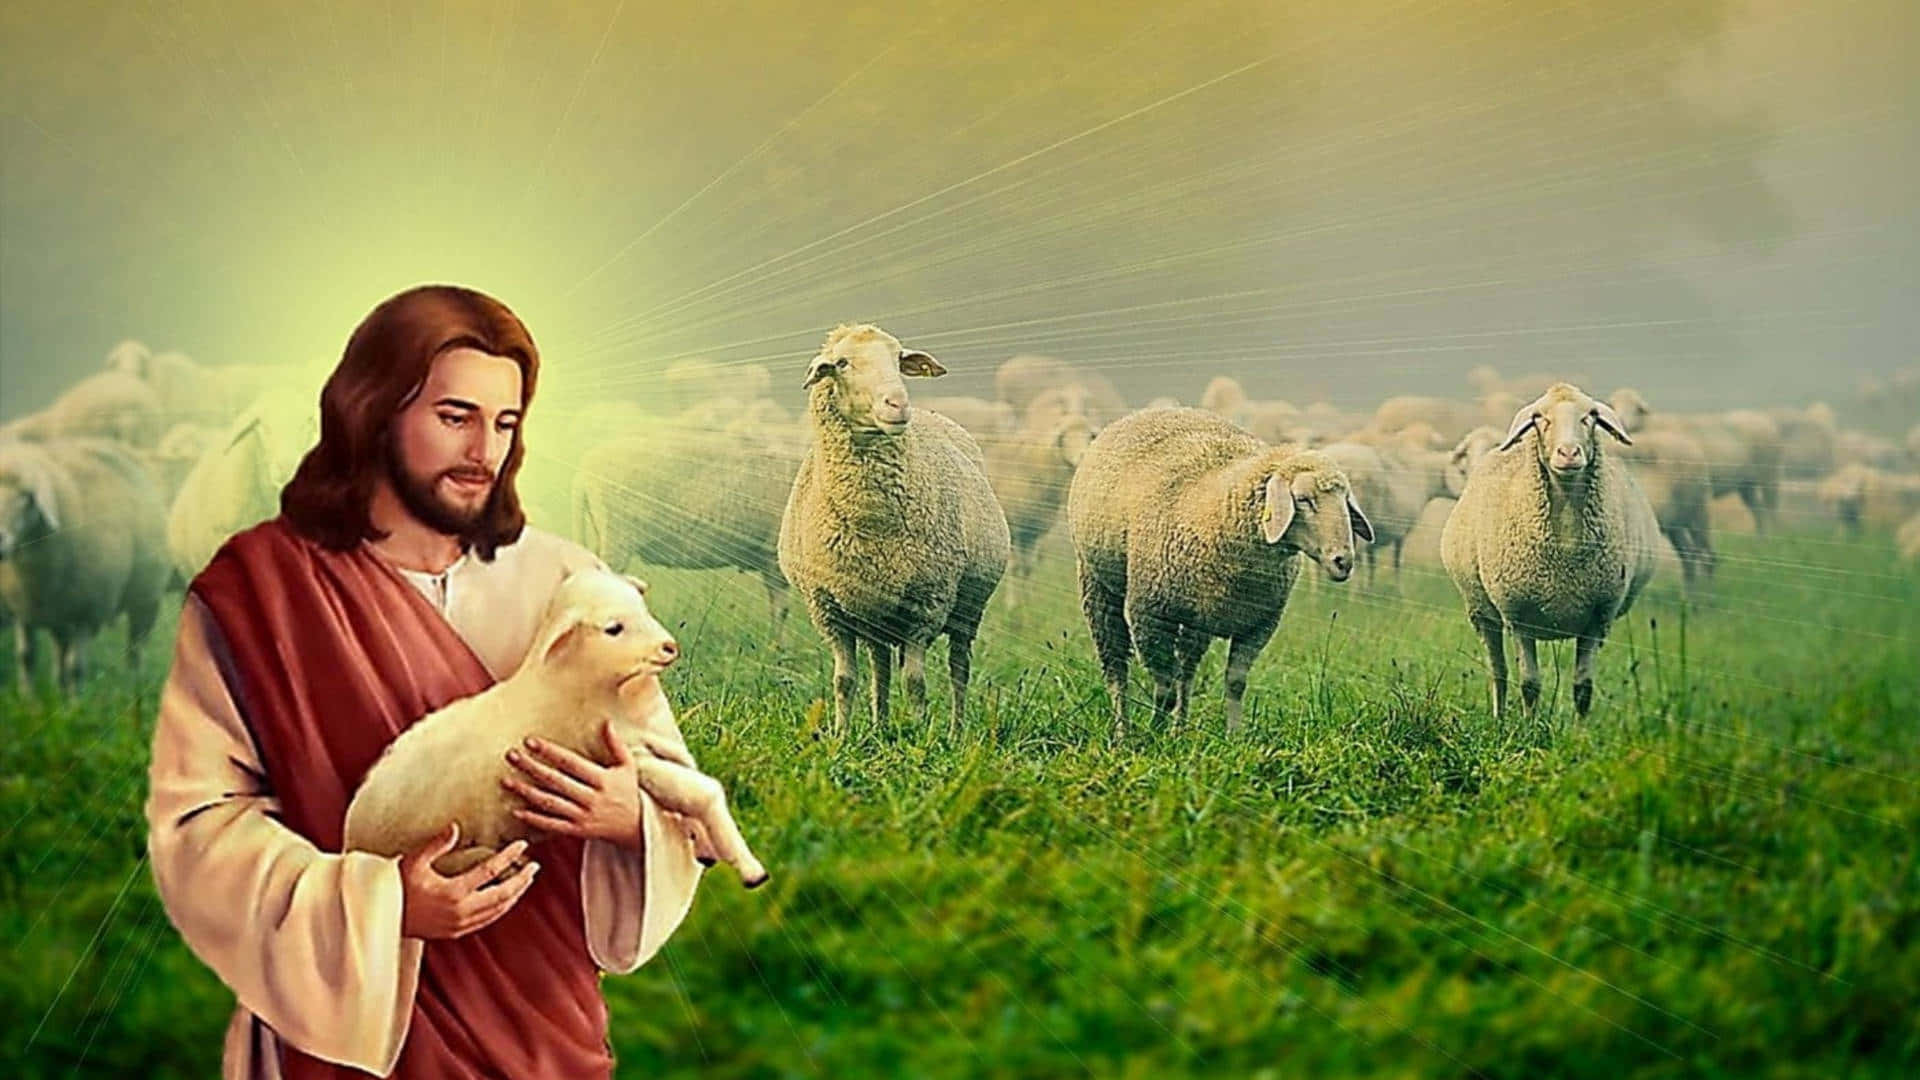 Download Jesus tenderly guiding His sheep Wallpaper | Wallpapers.com